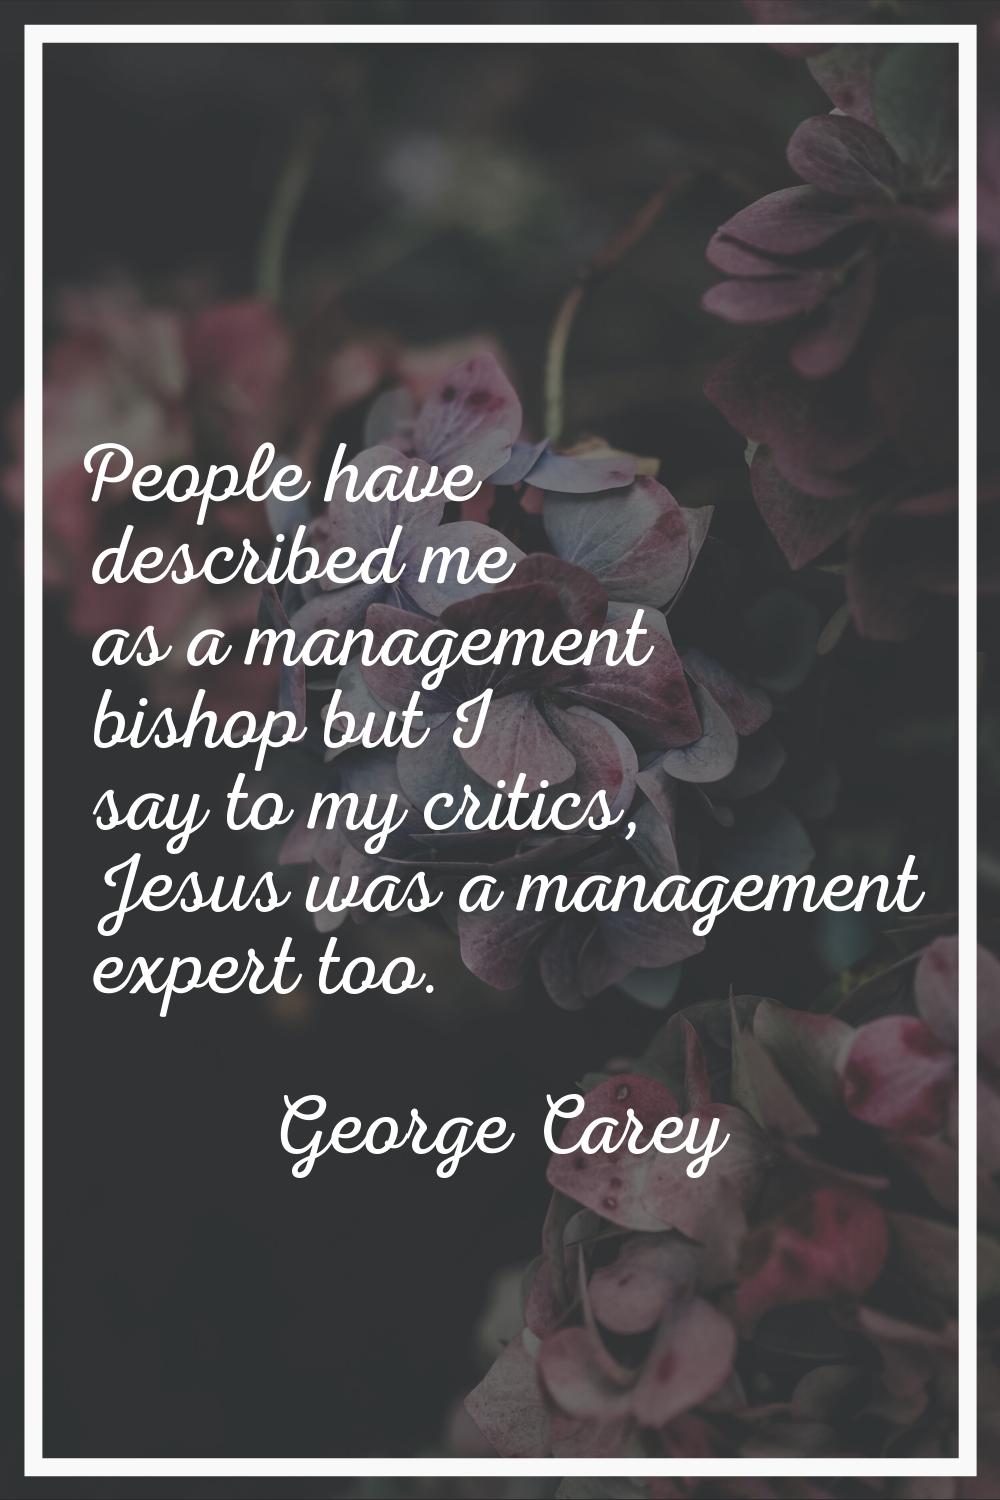 People have described me as a management bishop but I say to my critics, Jesus was a management exp